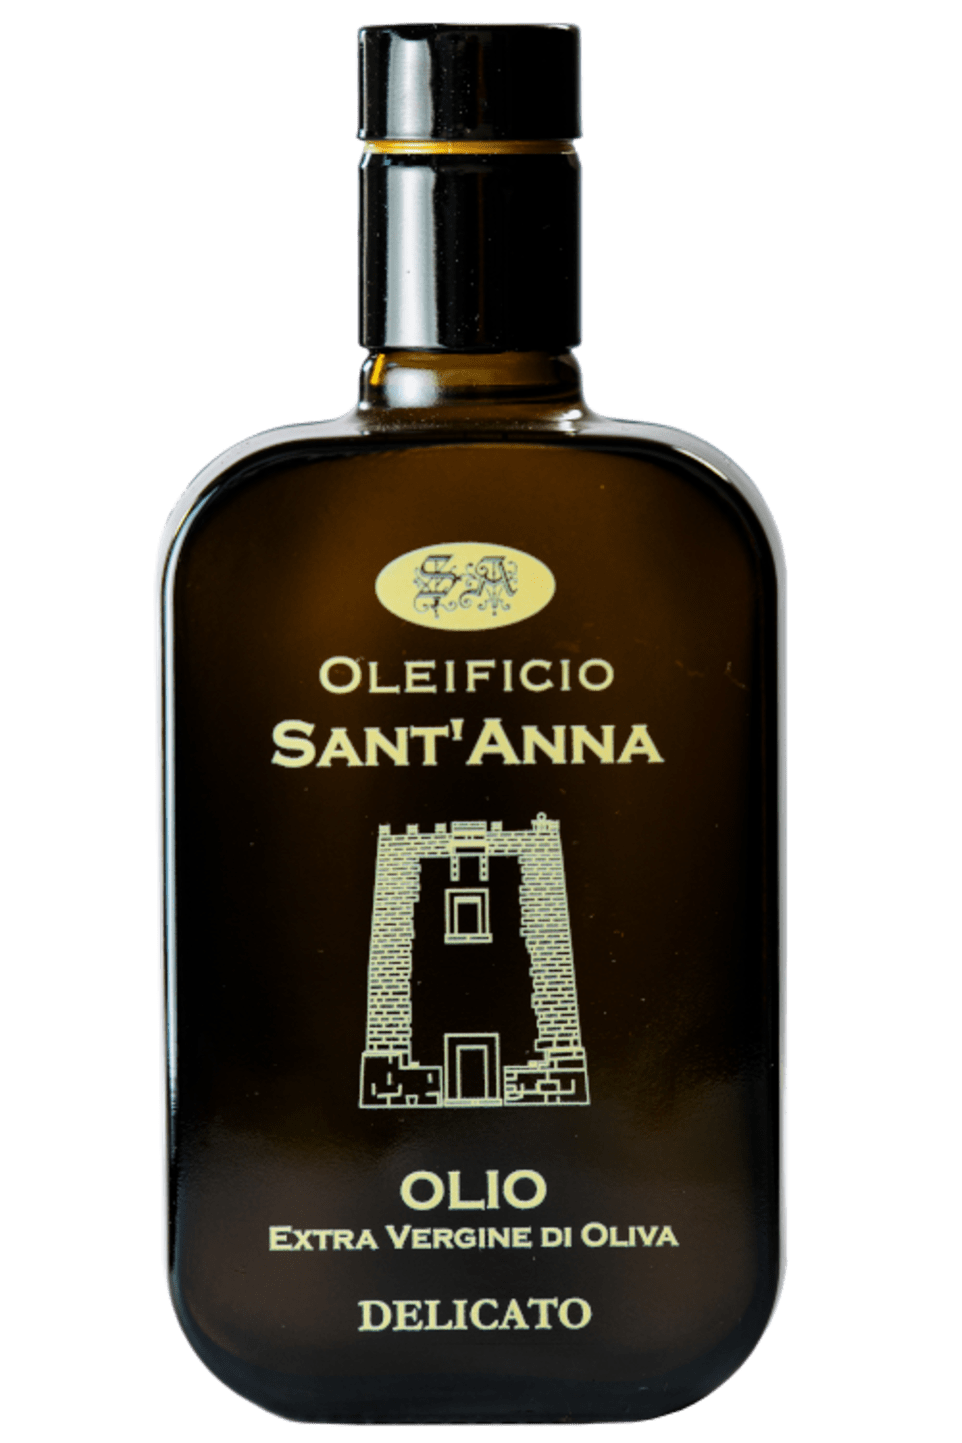 LIGHT EXTRAVIRGIN OLIVE OIL - 100% PRODUCT OF ITALY